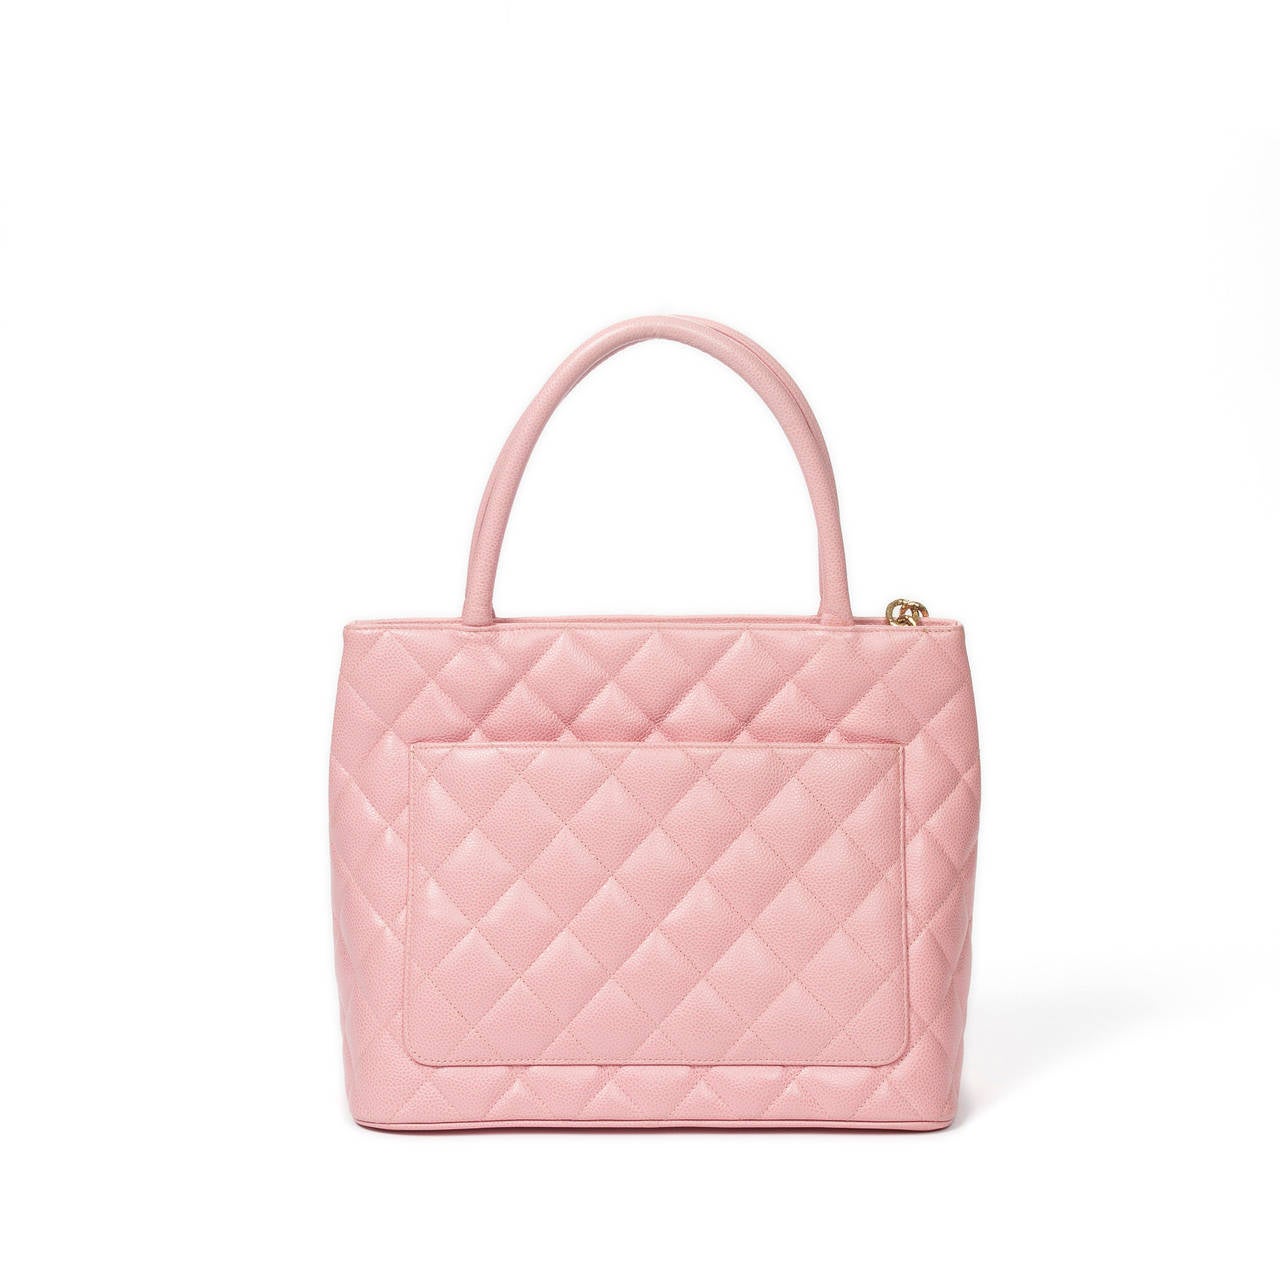 Chanel Médaillon Pink Leather For Sale 1